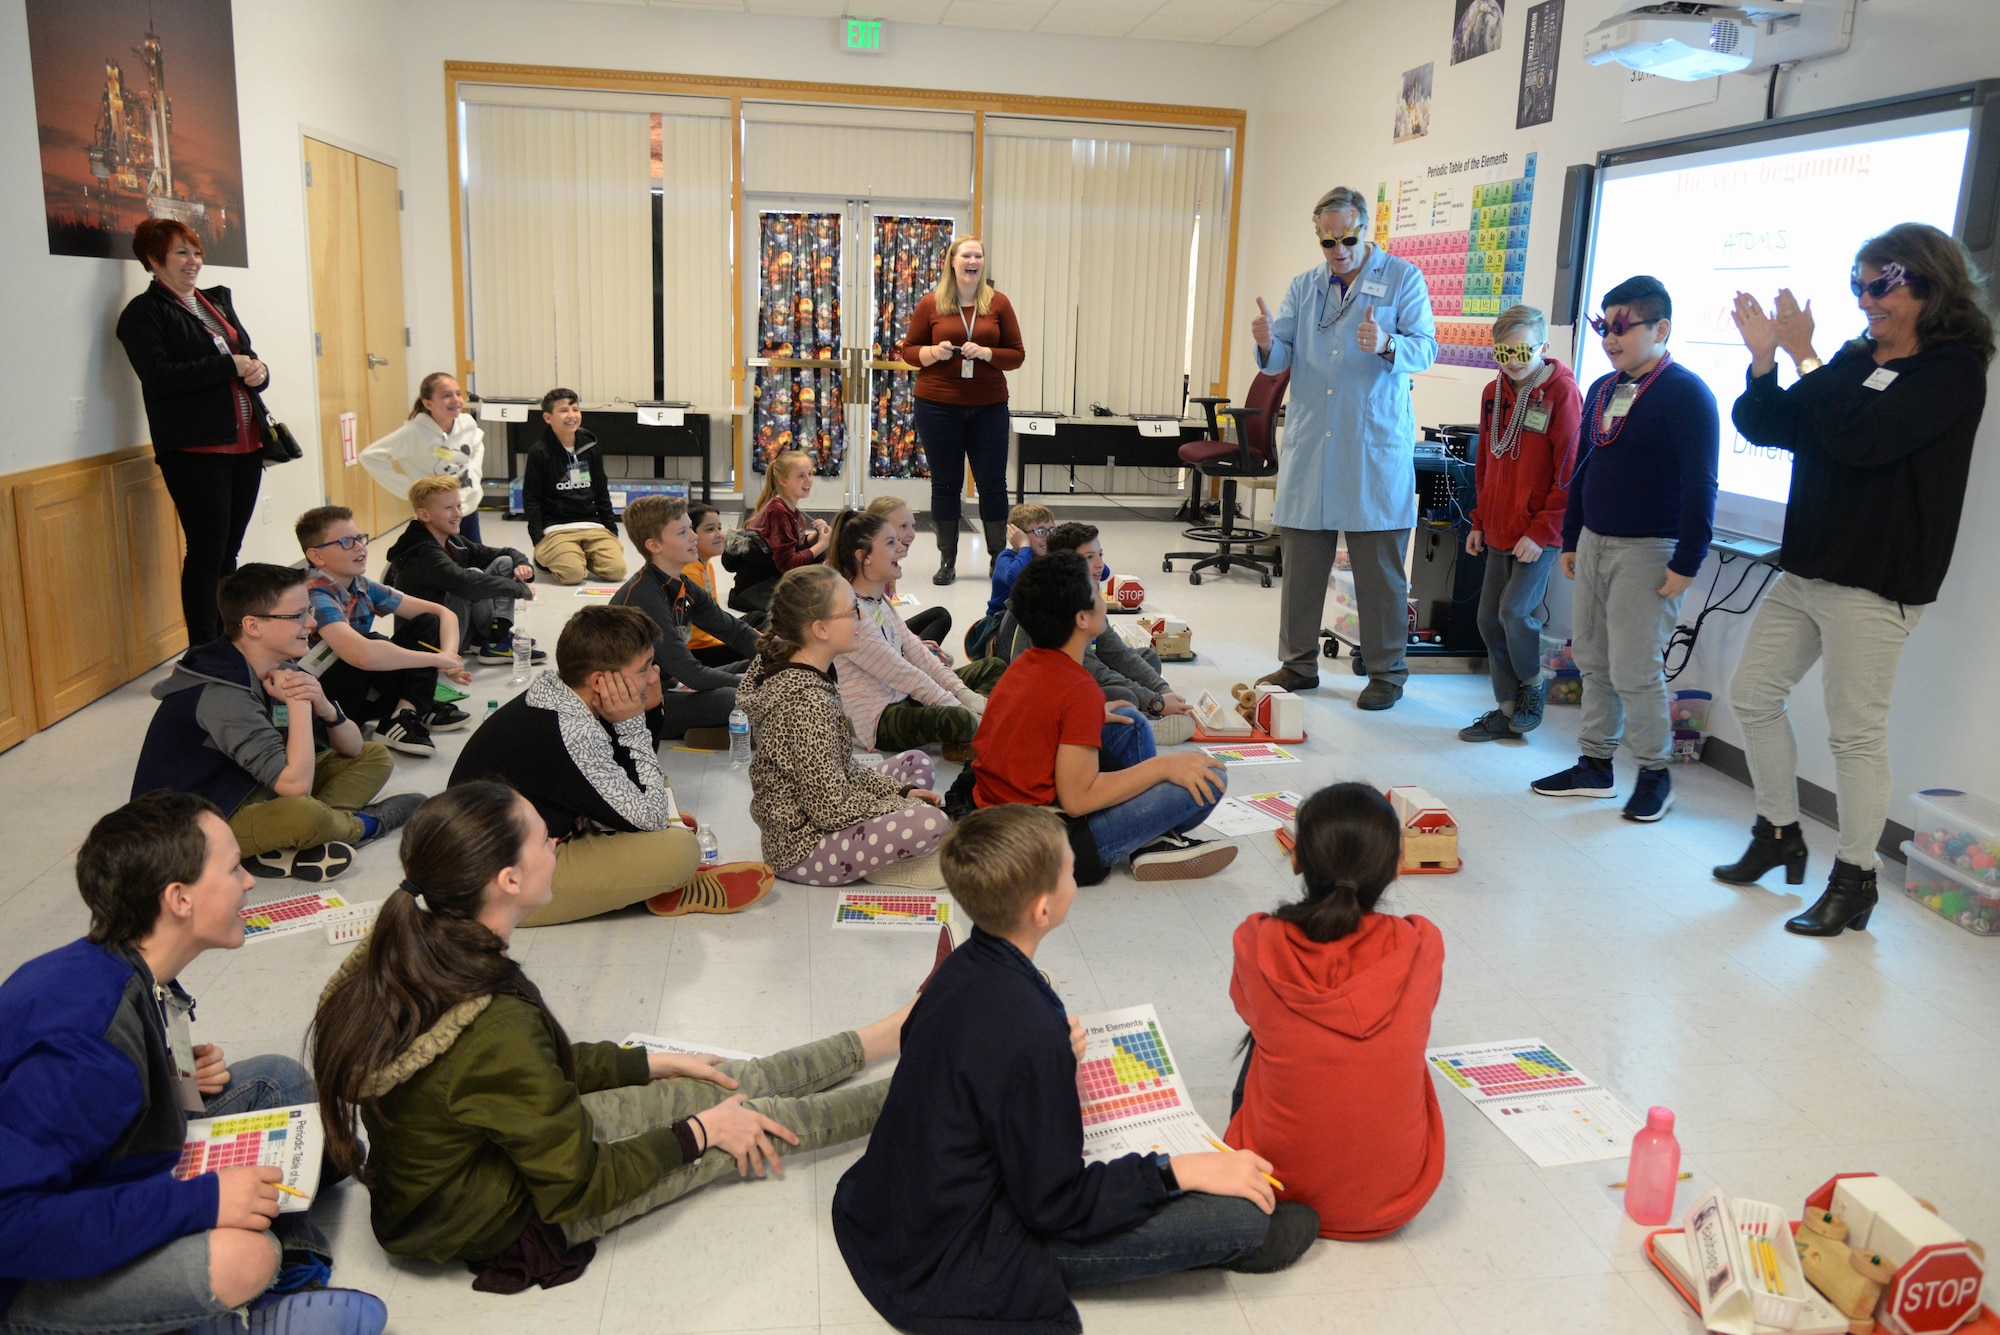 Sixth graders from Adelaide Elementary in Bountiful, Utah, learn about atoms, elements and compounds during Starbase at Hill Air Force Base March 15, 2018. Starbase is a nationwide program that aims to introduce elementary school students to science, technology, engineering and math and is funded entirely by the Department of Defense. (U.S. Air Force photo by Cynthia Griggs)